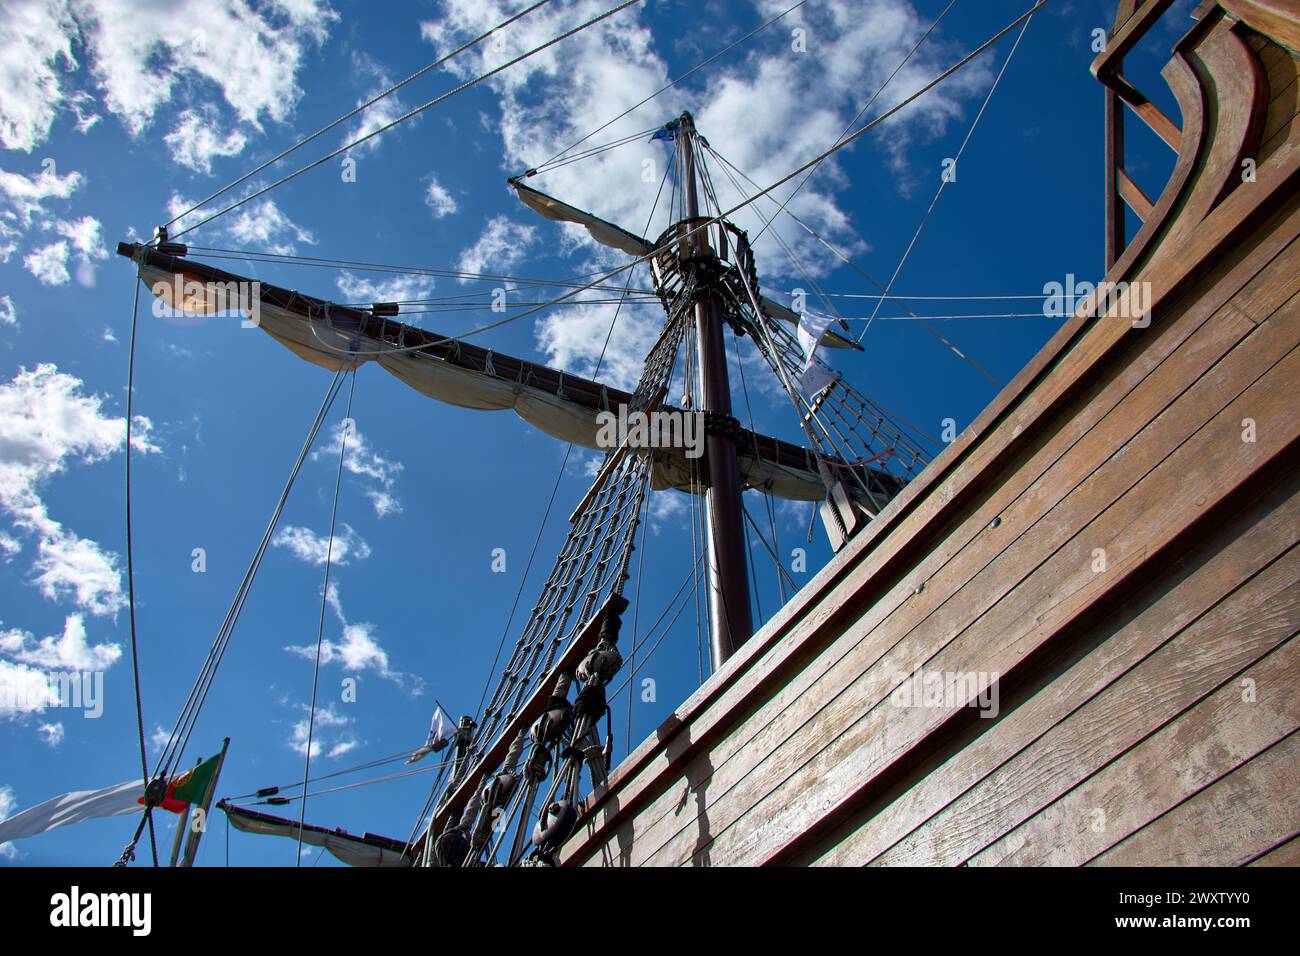 The tall wooden masts of the replica caravel Santa Maria against a clear blue sky with some cloud. Many tightrope rigging and rope ladders are seen. B Stock Photo